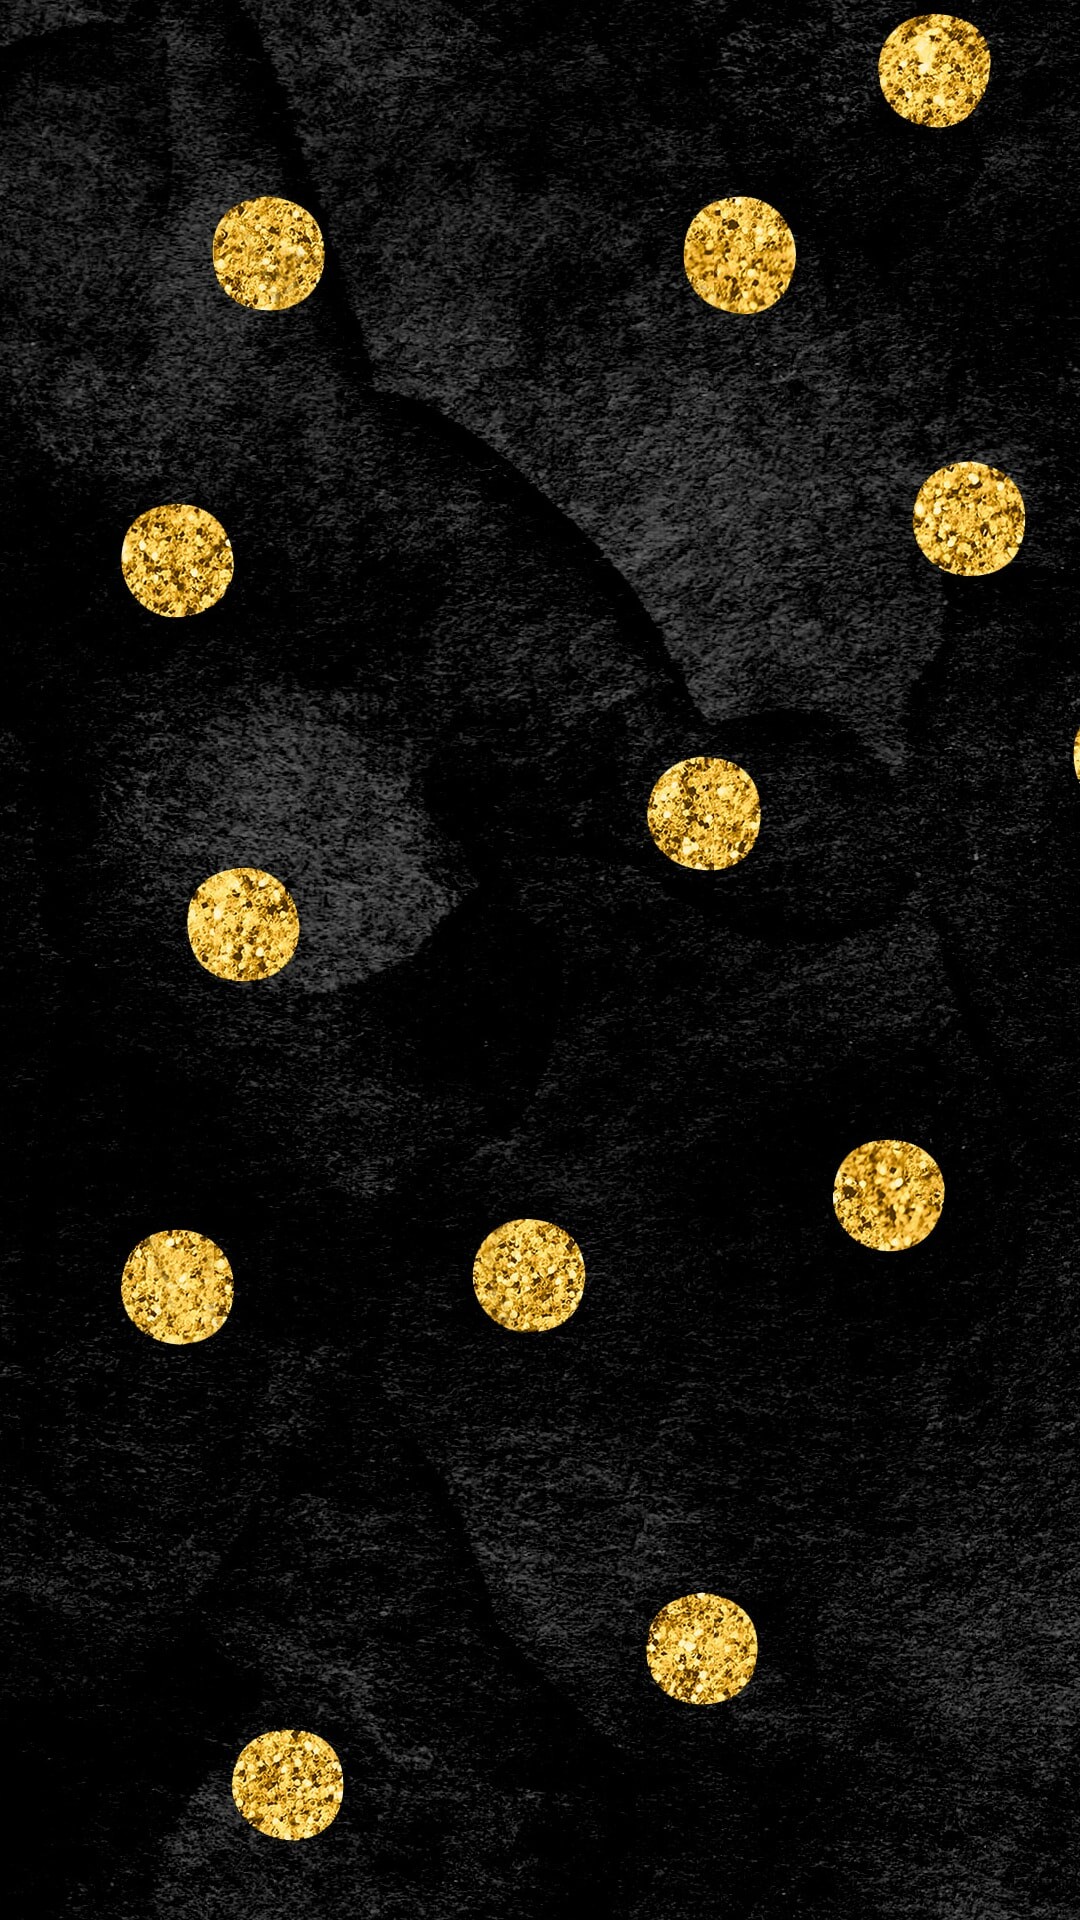 Gold Polka Dot: Golden spots on the black velvet, A type of woven tufted fabric with shimmer circles. 1080x1920 Full HD Wallpaper.